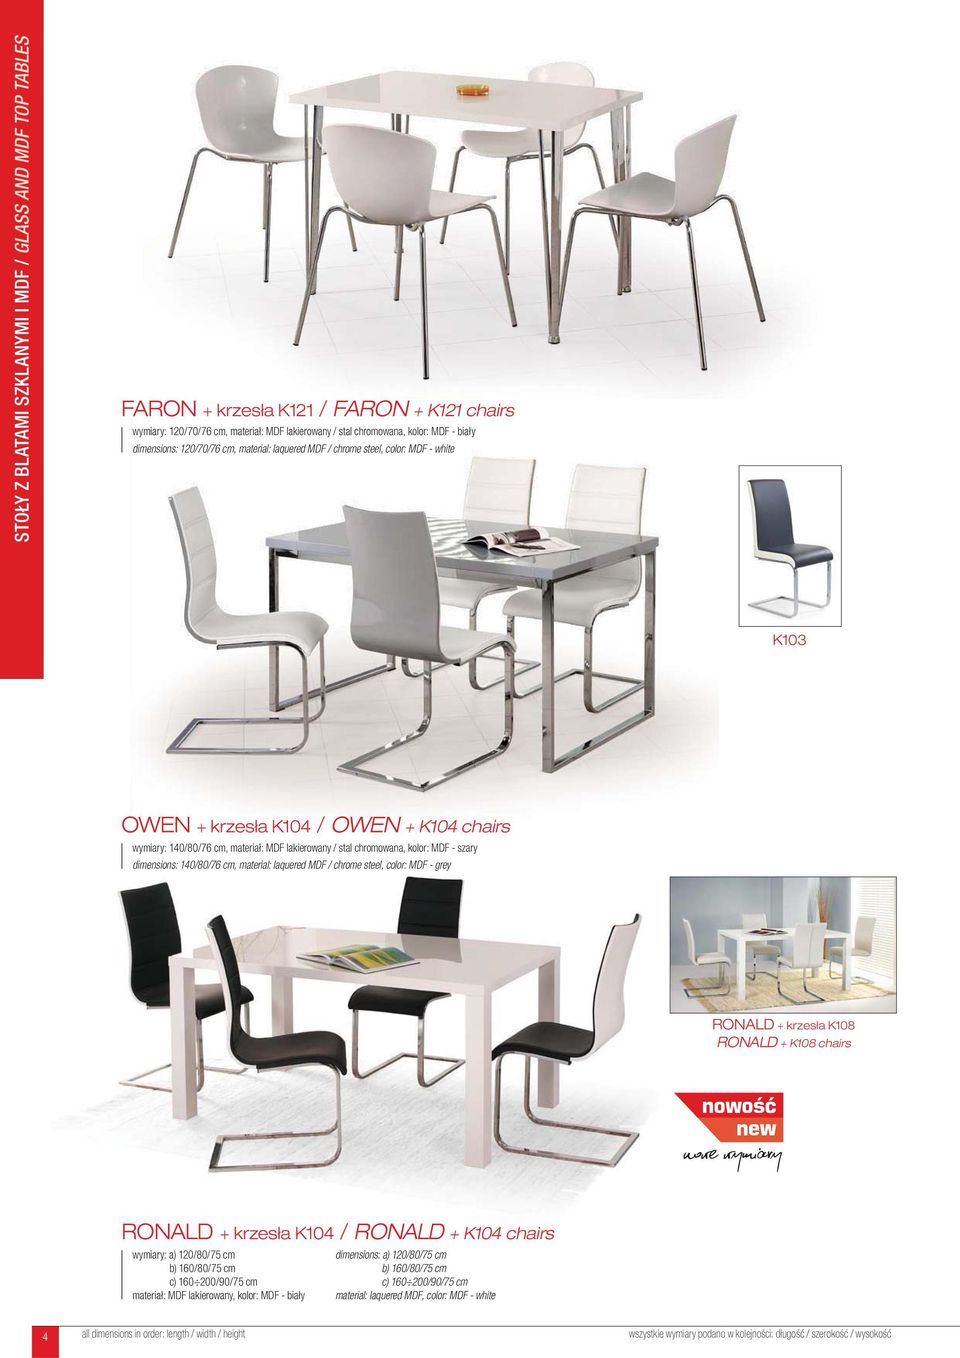 kolor: MDF - szary dimensions: 140/80/76 cm, material: laquered MDF / chrome steel, color: MDF - grey RONALD + krzesła K108 RONALD + K108 chairs nowe wymiary RONALD + krzesła K104 / RONALD + K104